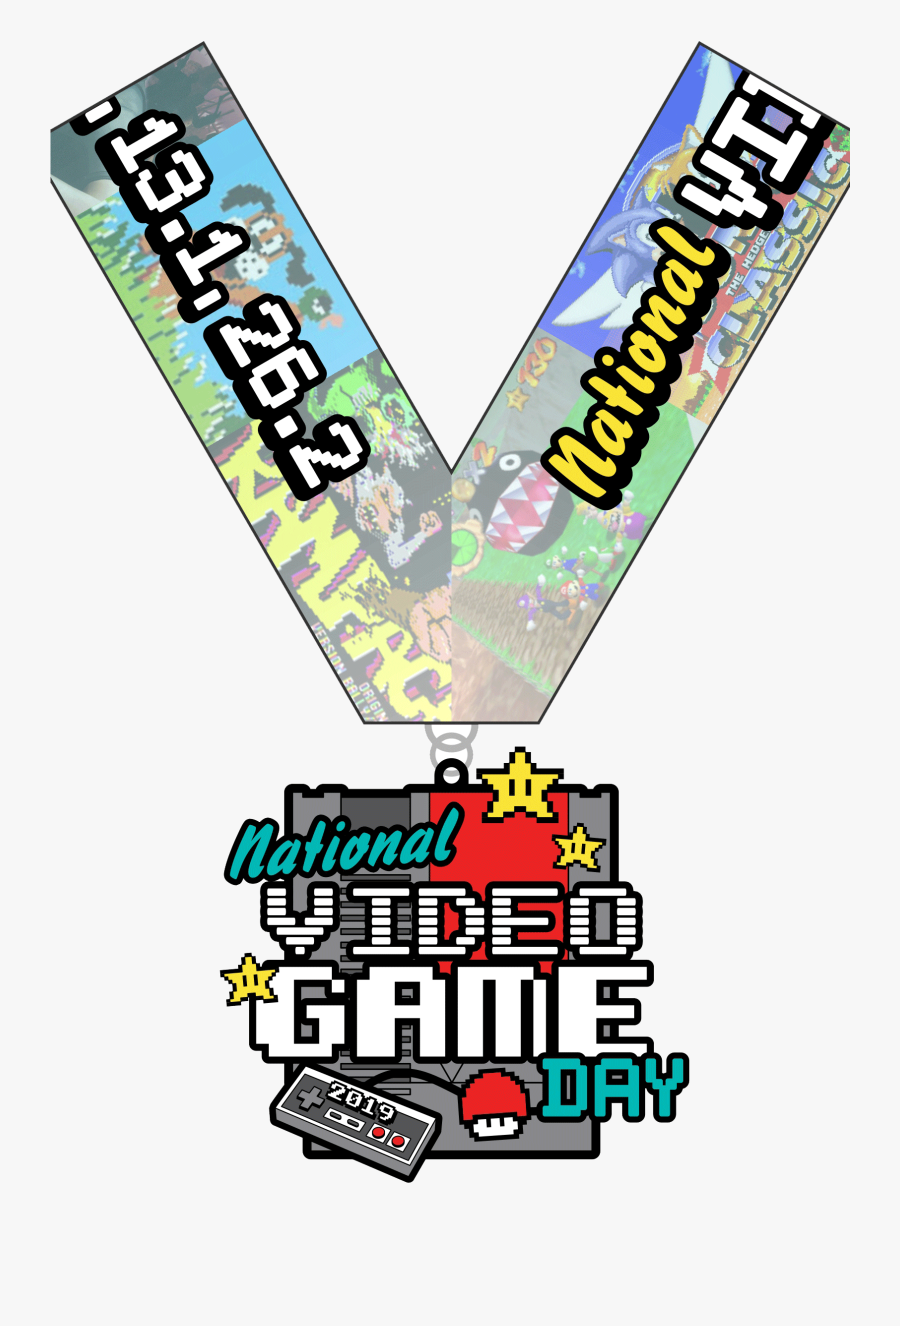 National Video Game Day 2019, Transparent Clipart